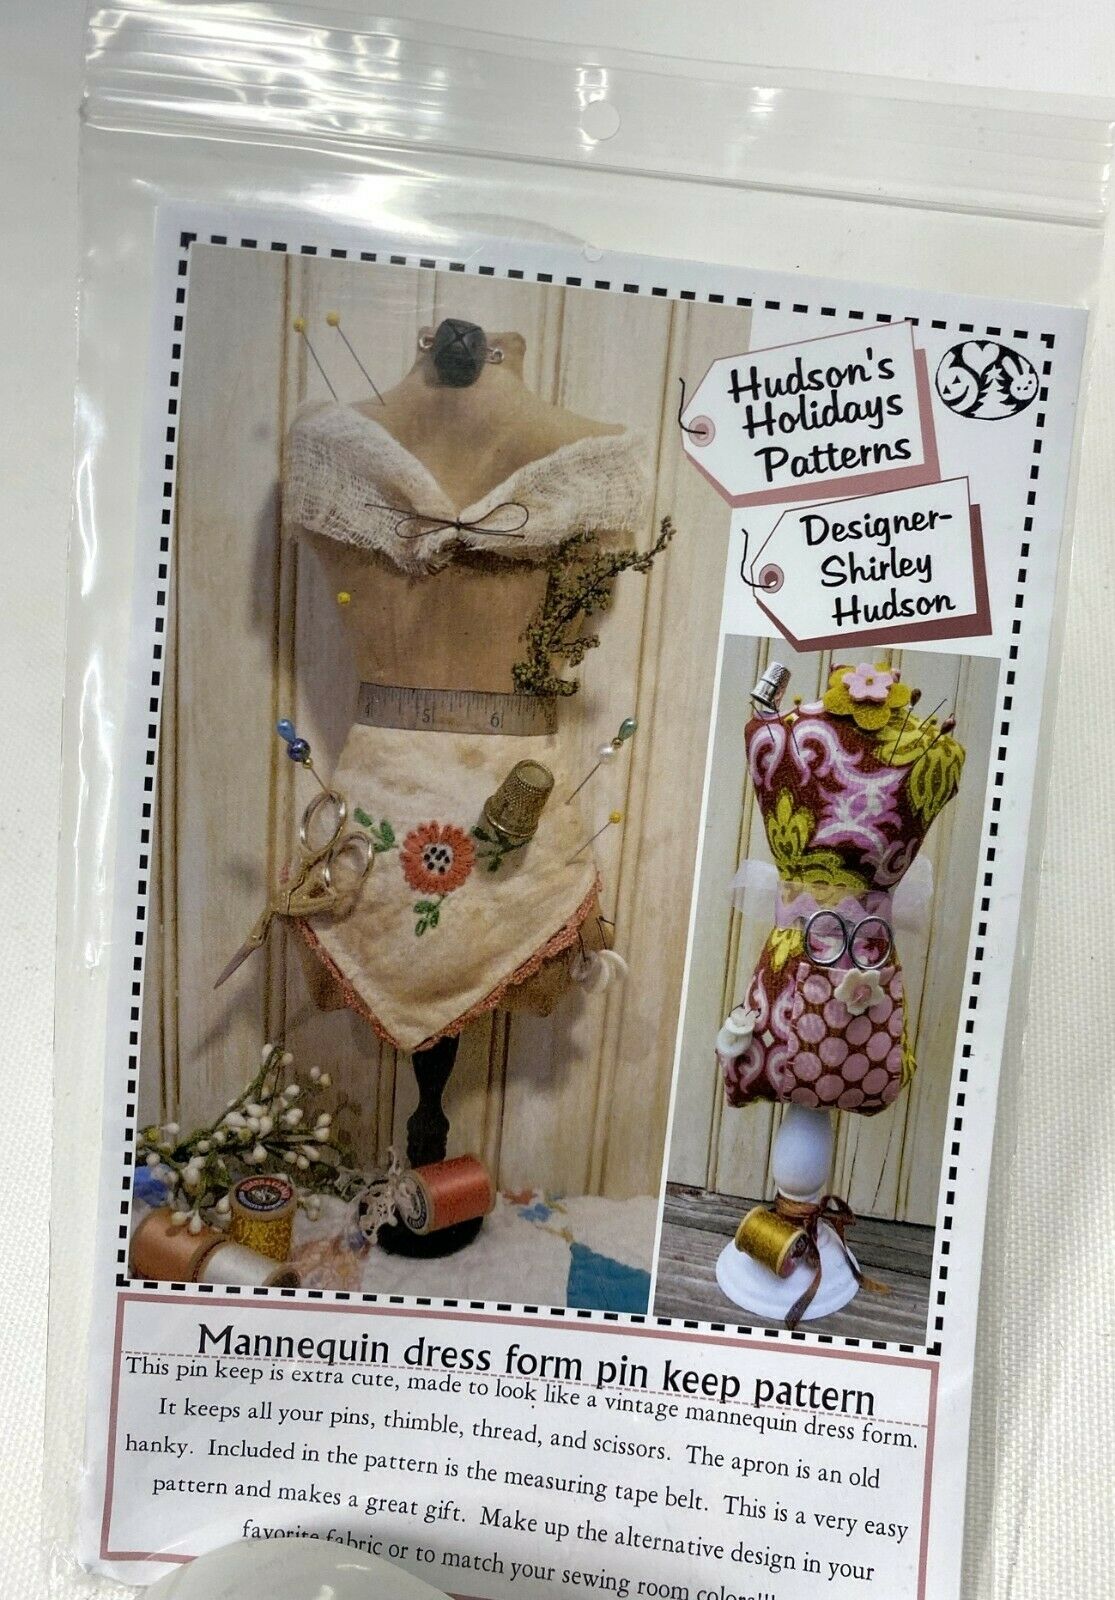 Hudson's Holiday Designs Mannequin Dressform Pin Keep